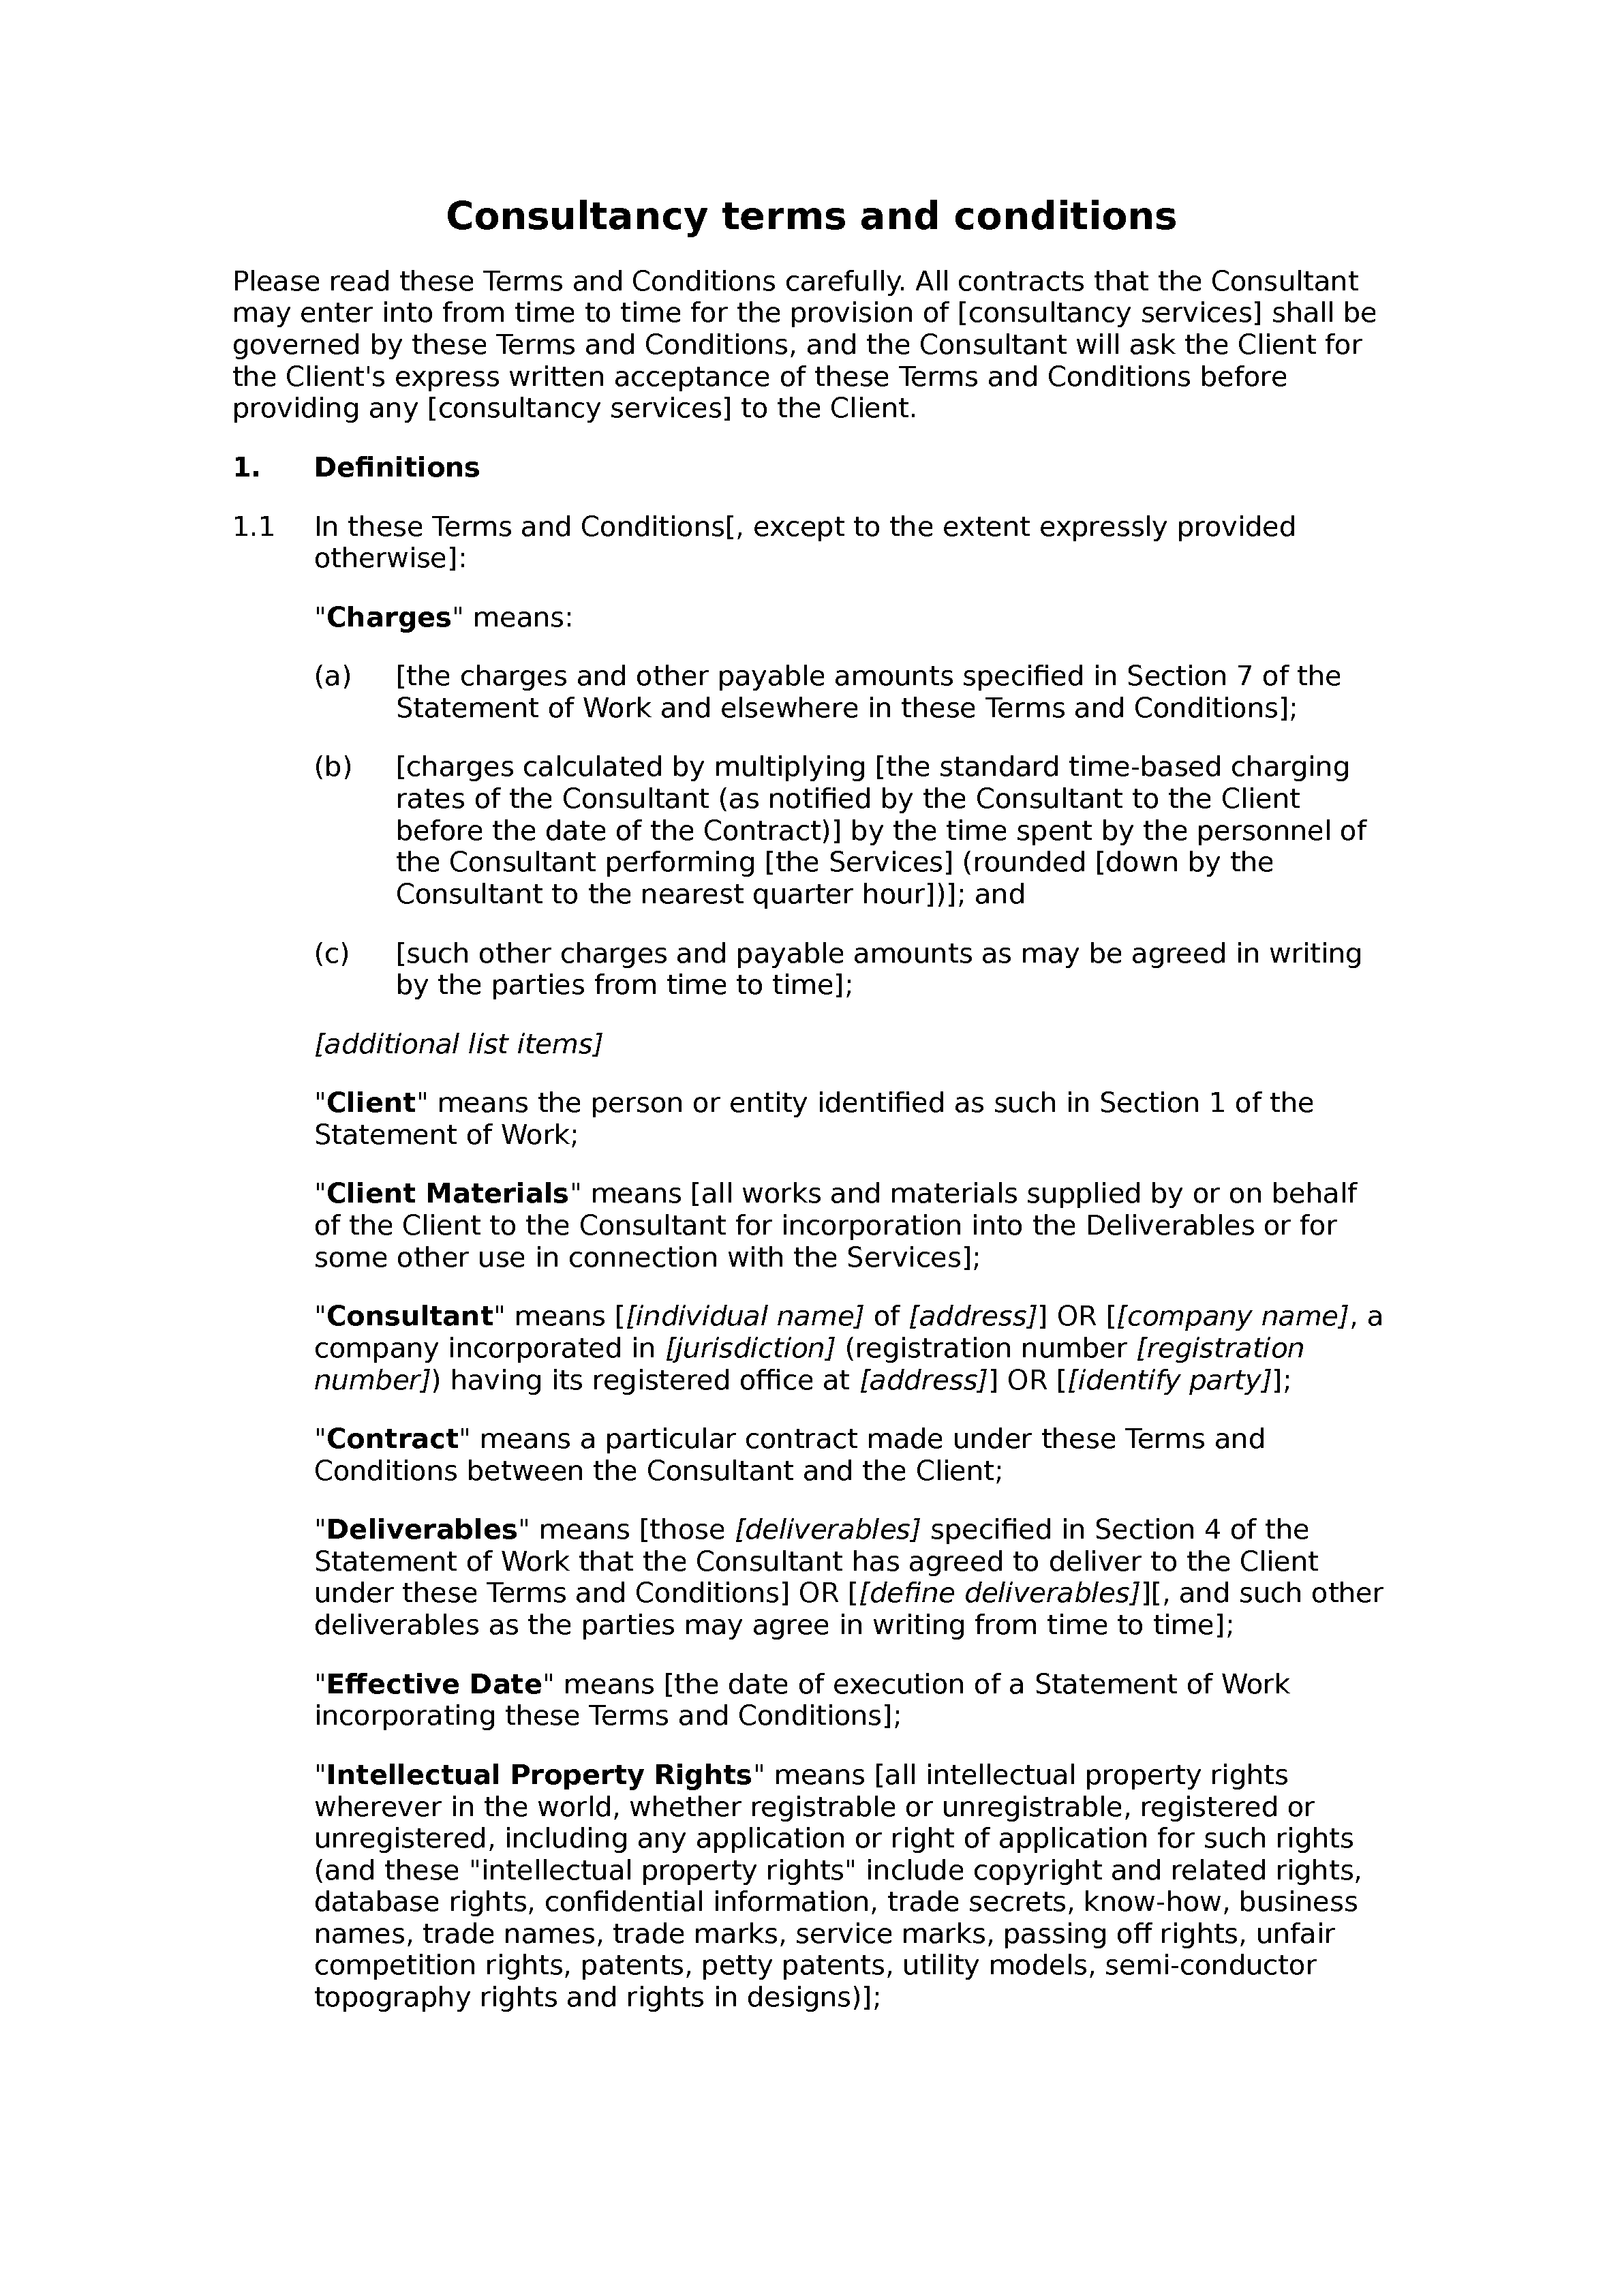 Consultancy terms and conditions (basic) document preview